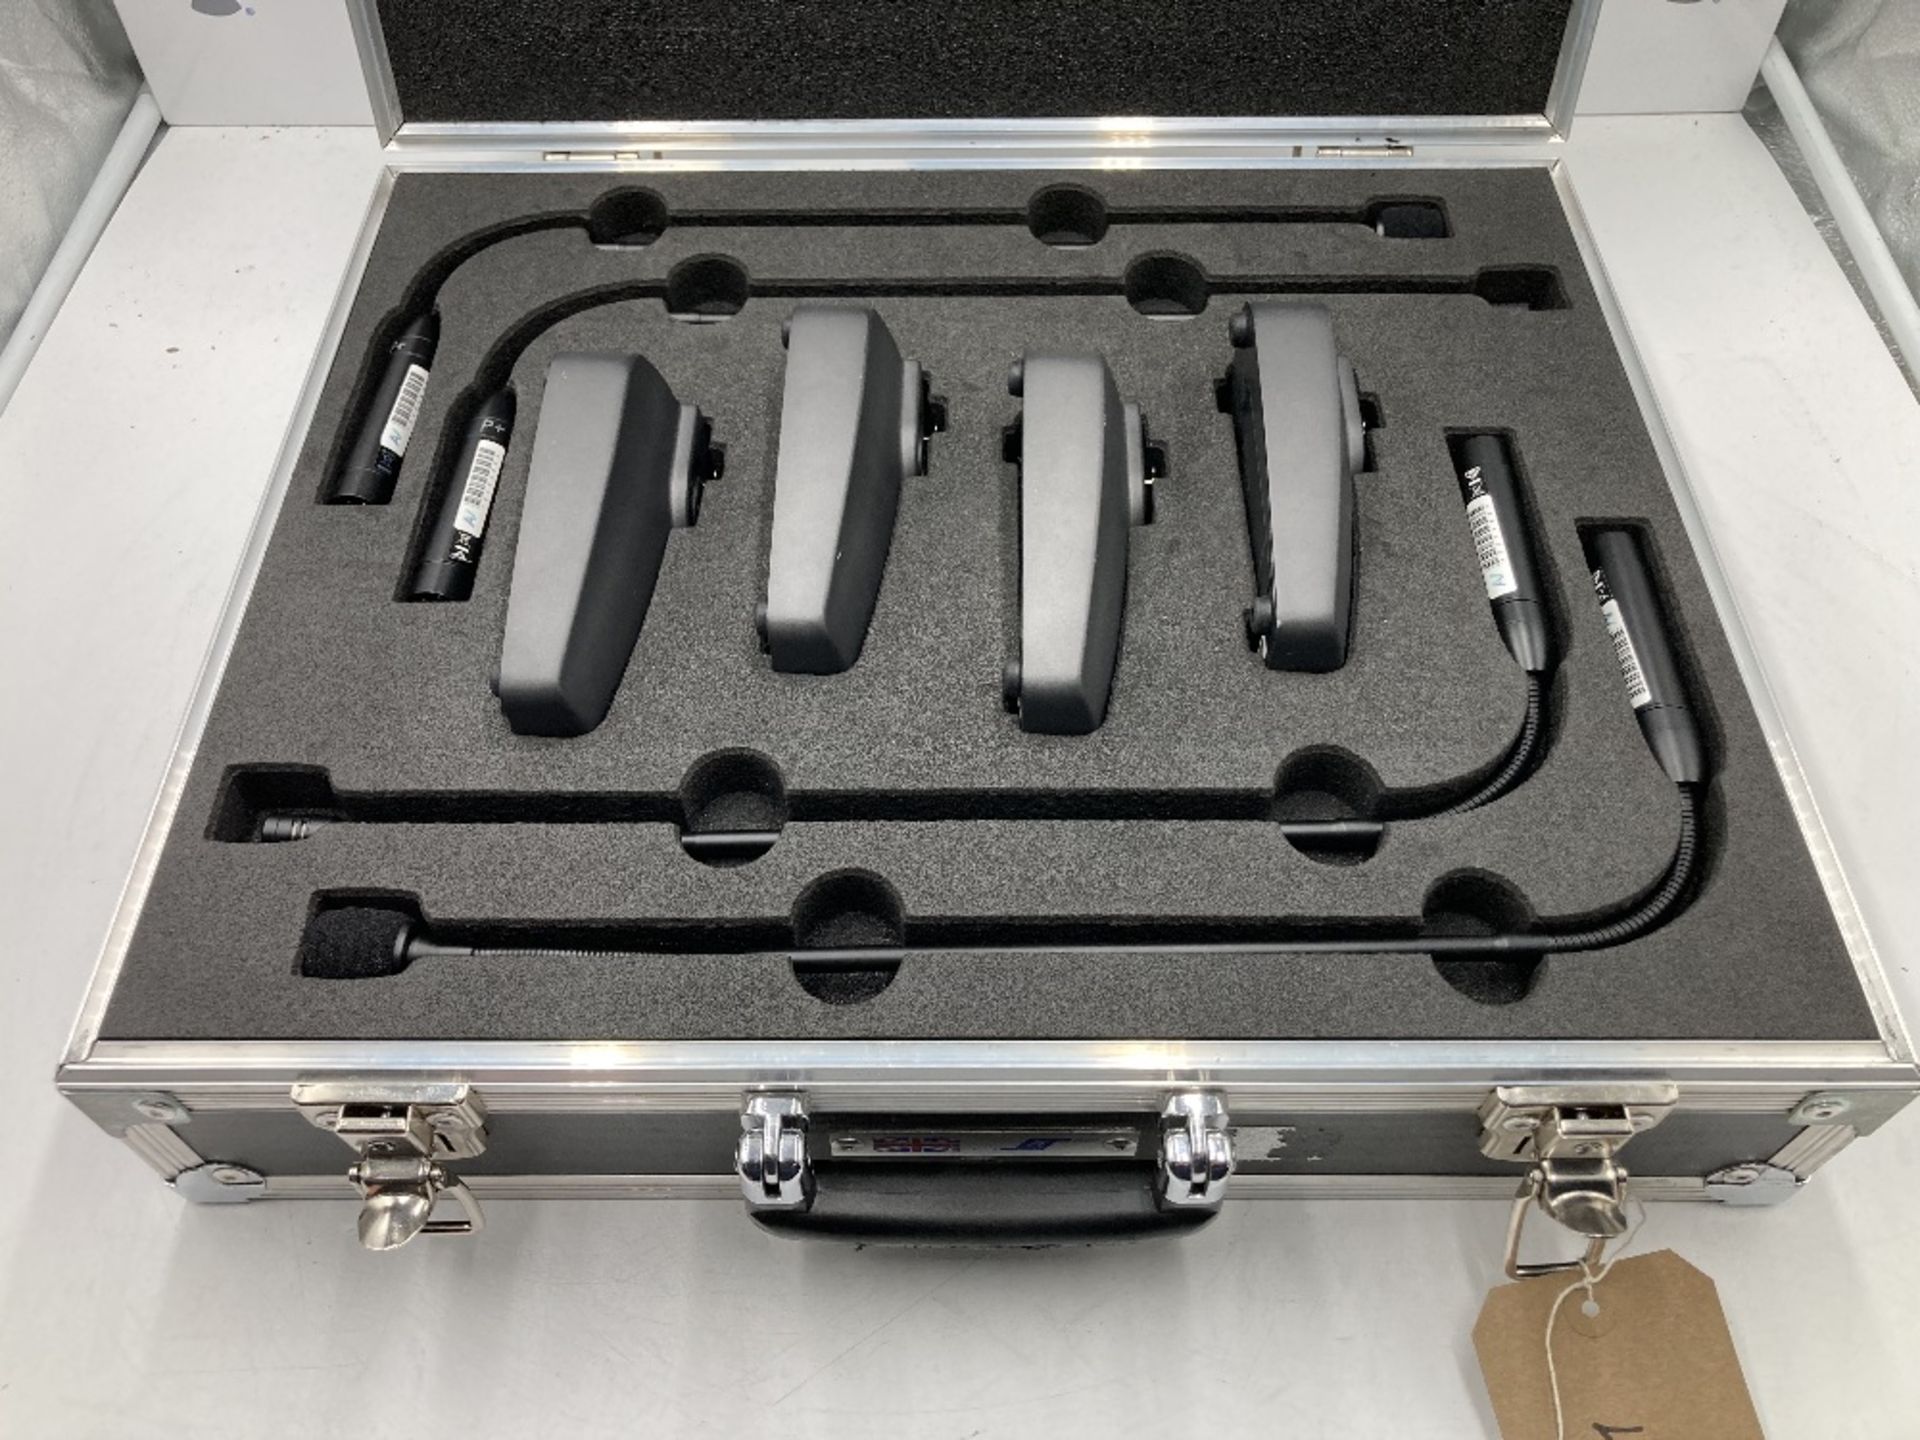 Samson Long Neck Table Top Microphone Kit & Heavy Duty Case - Image 2 of 6